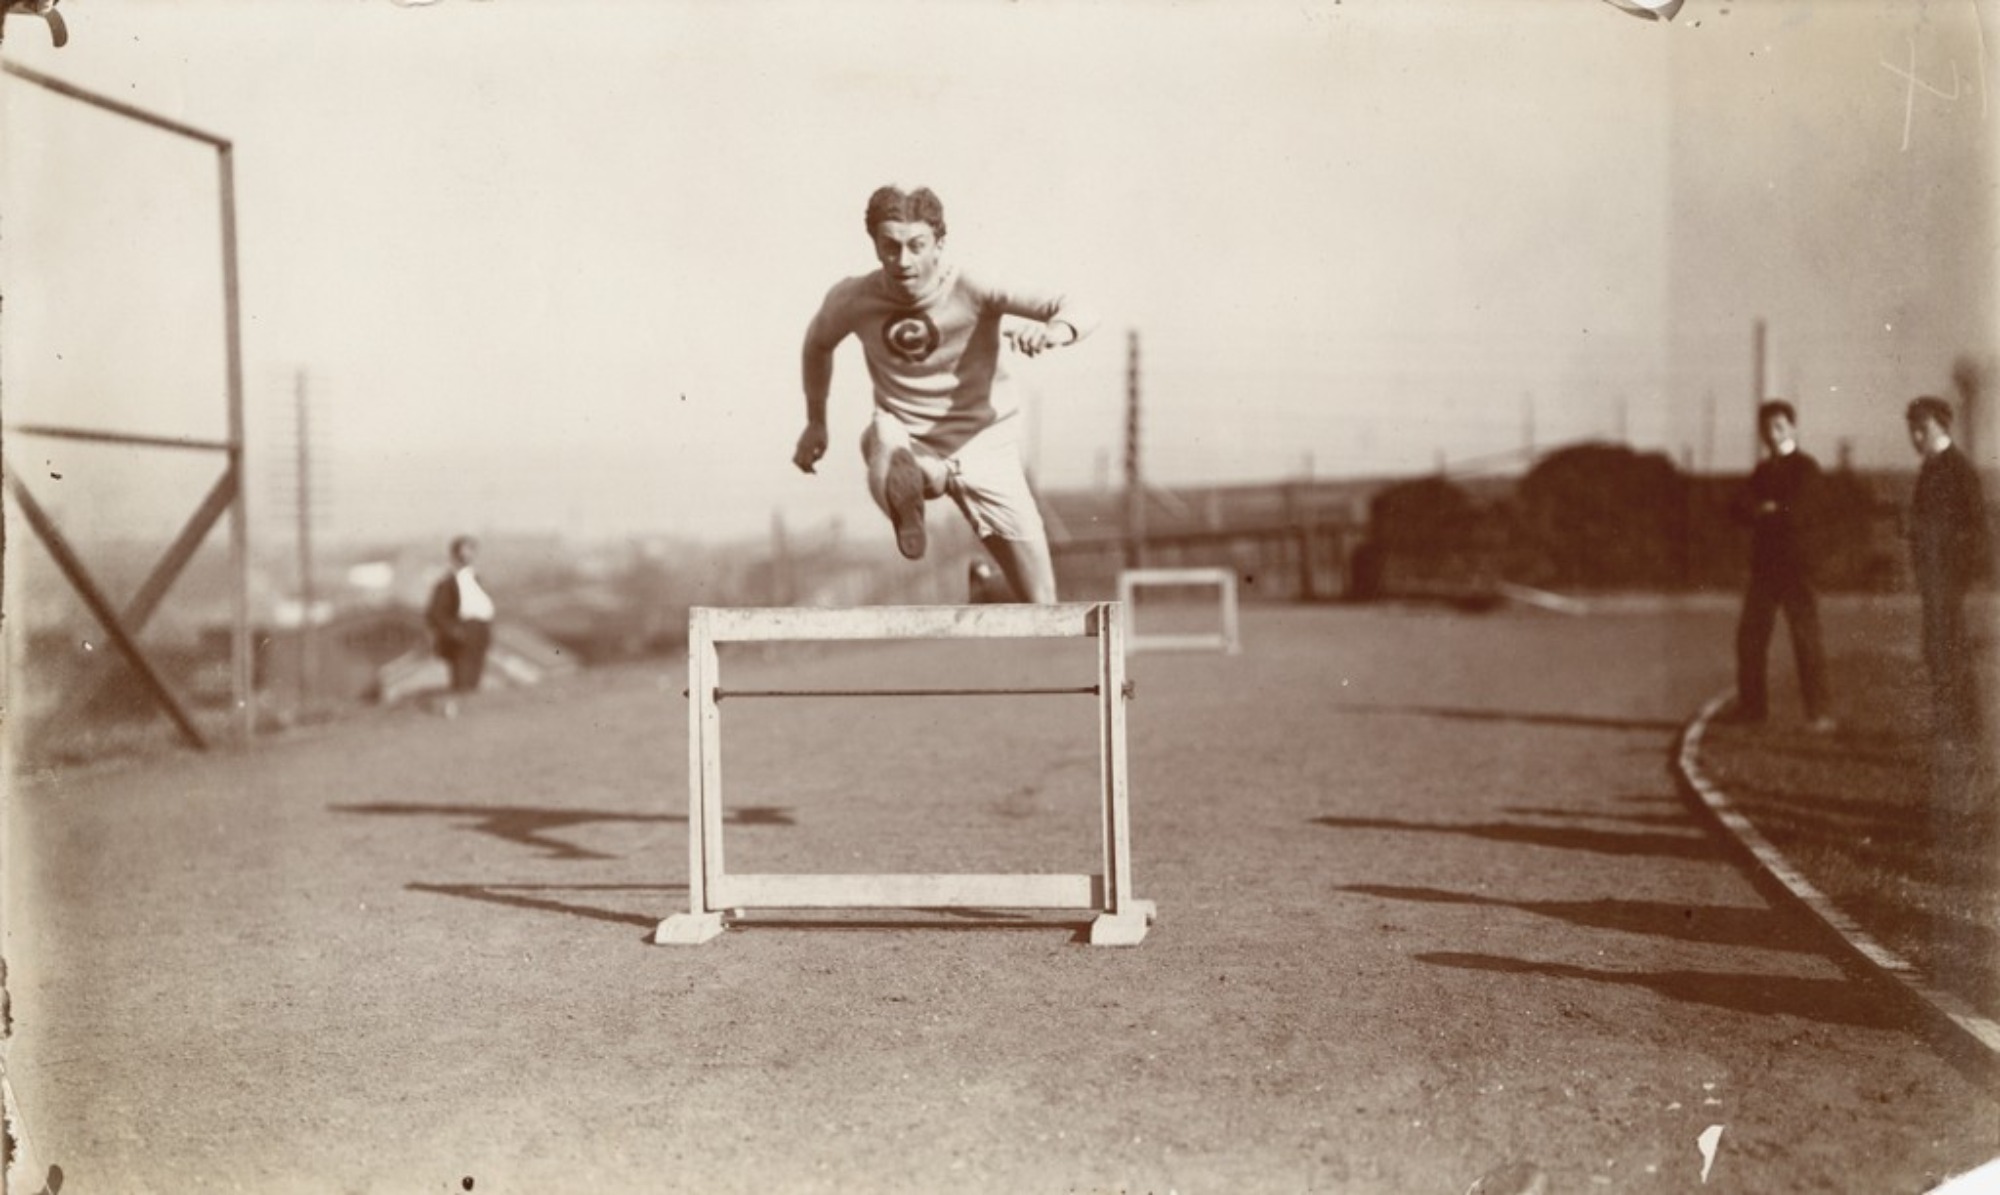 Alvin Christian Kraenzlein jumps over a hurdle while wearing a sweat suit circa 1900.